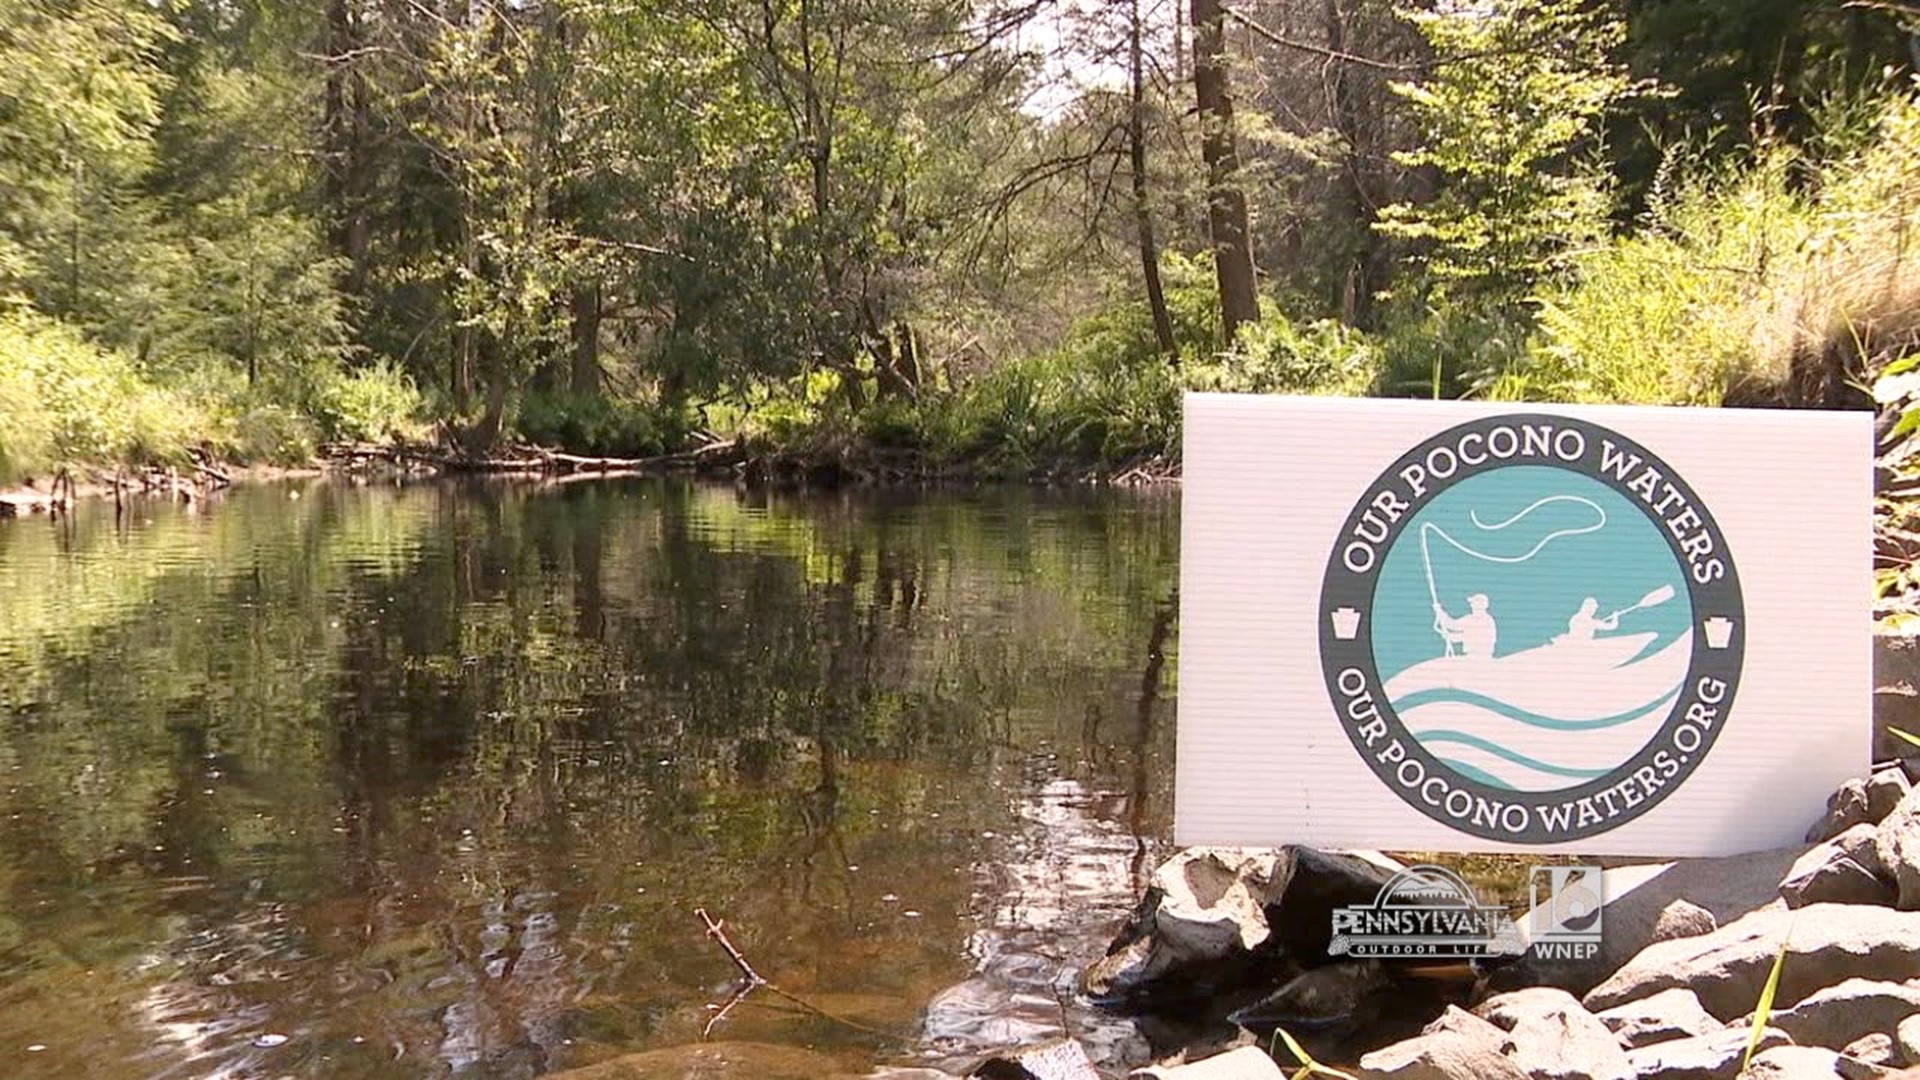 An effort to keep the Pocono waters clean.